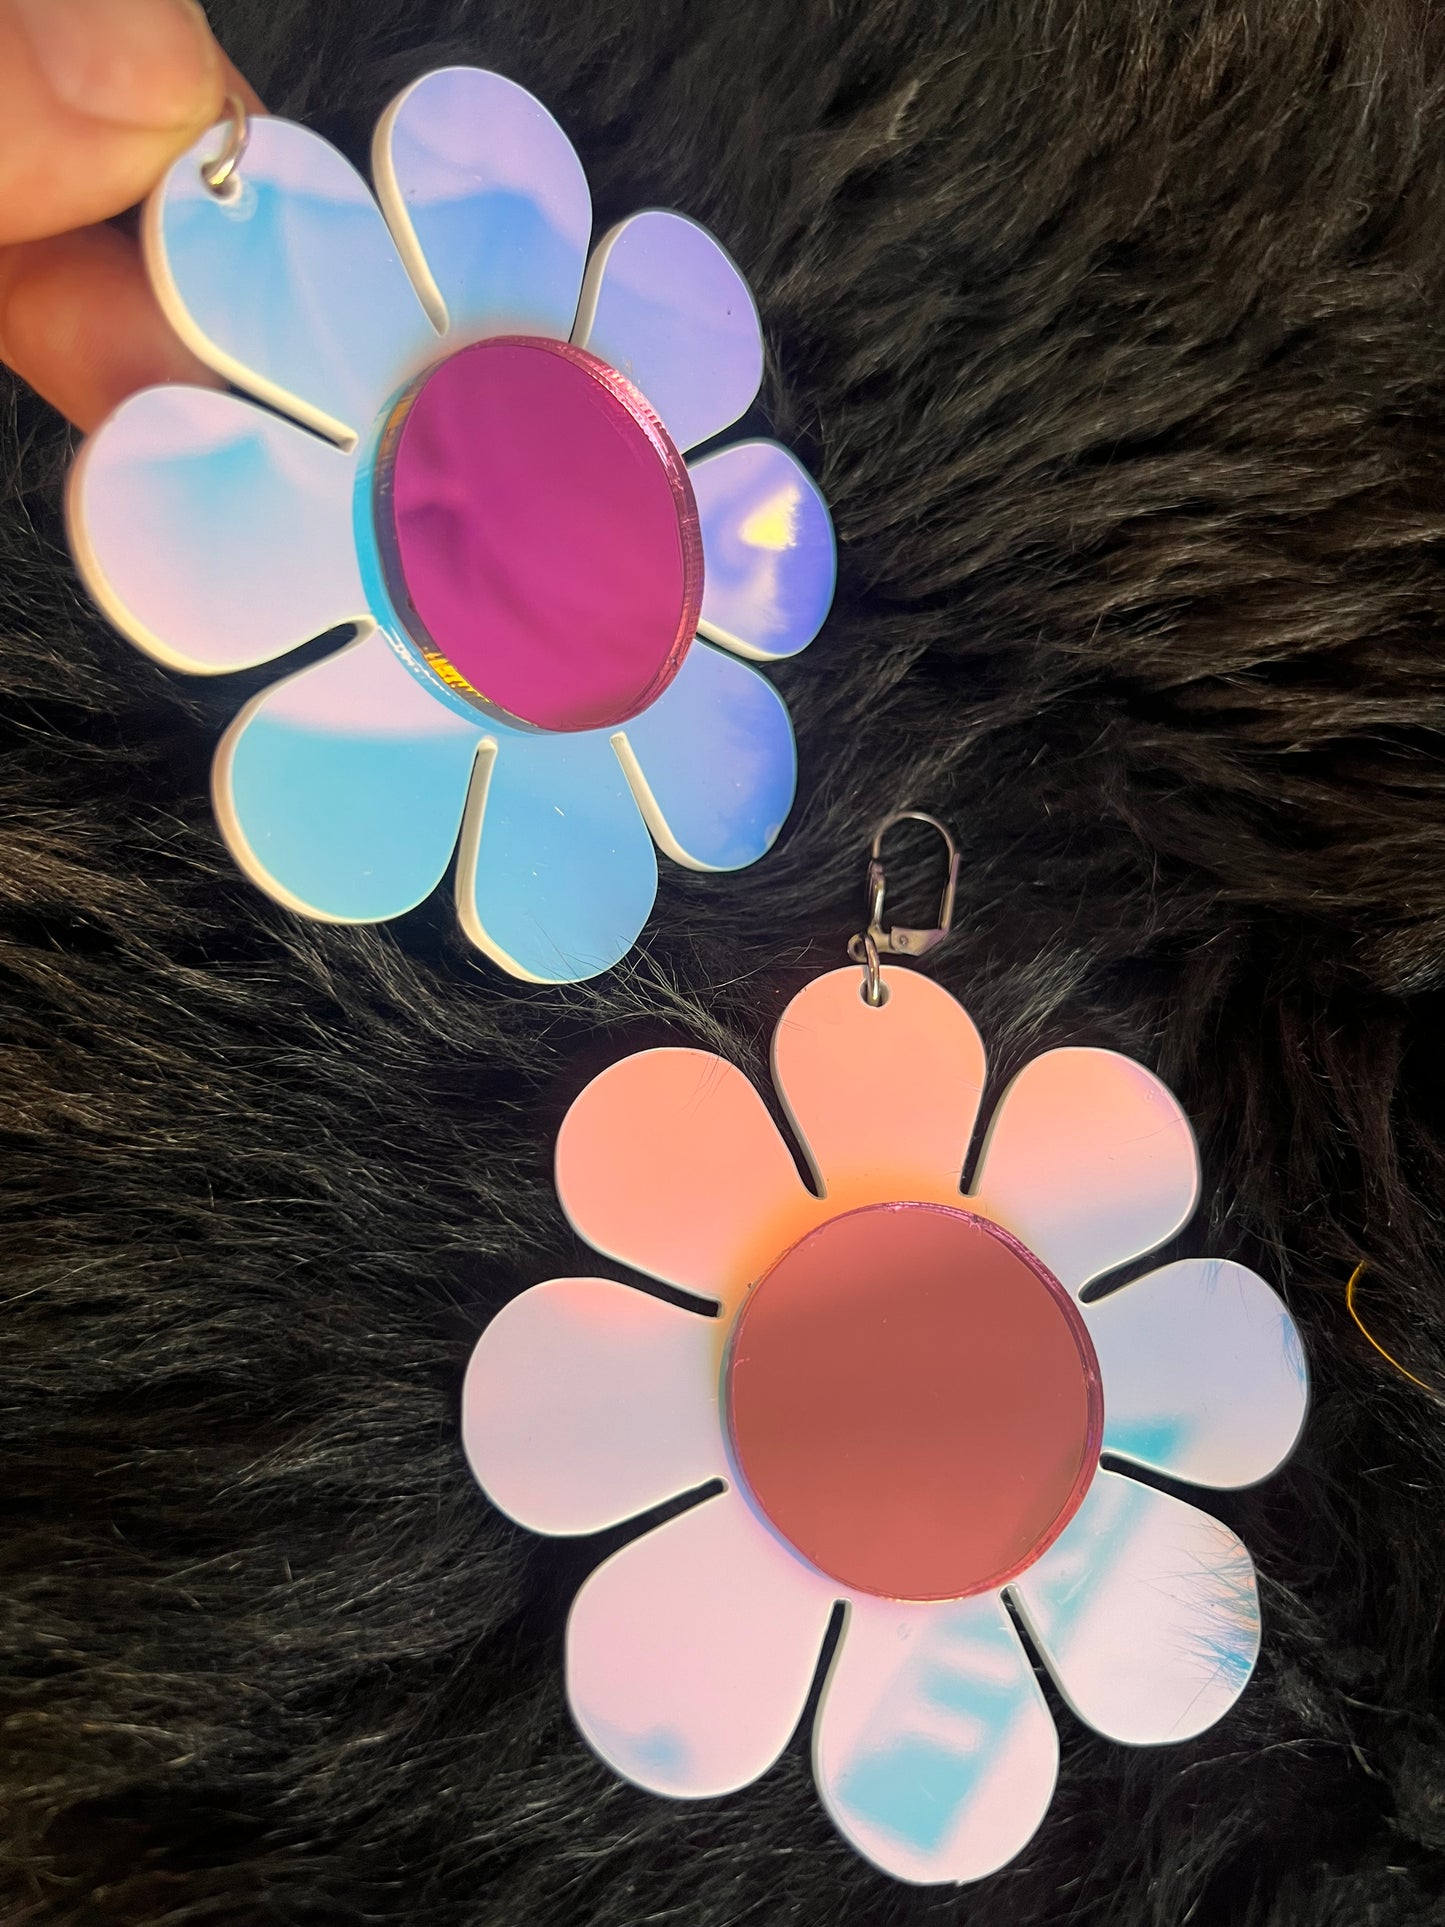 Holographic & pink mirror Flower Power Earrings